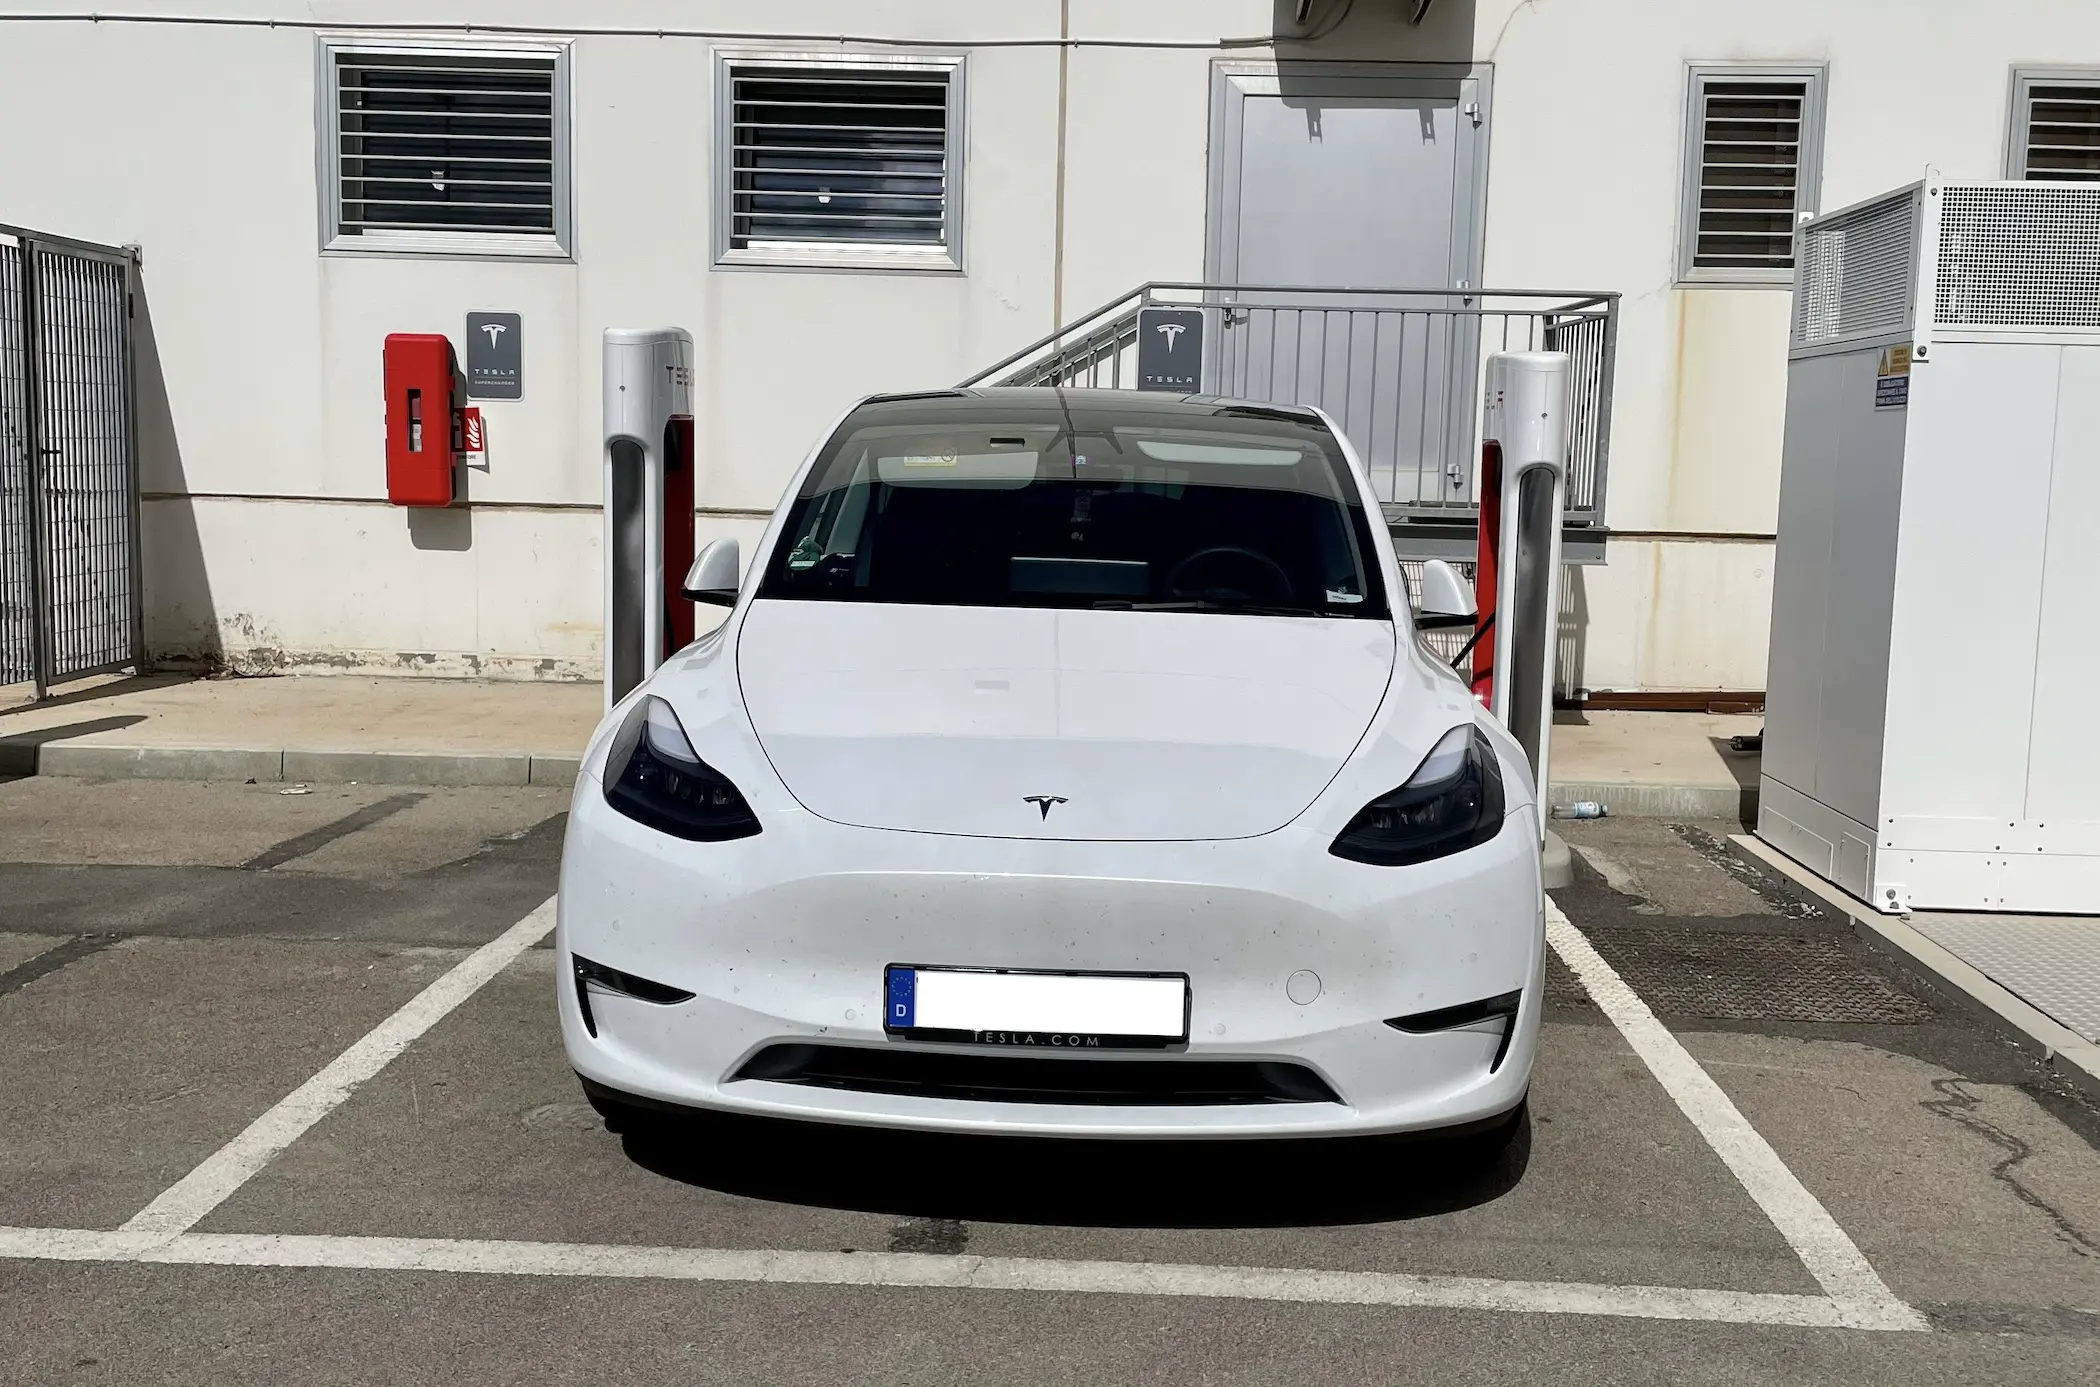 Supercharger in Olbia